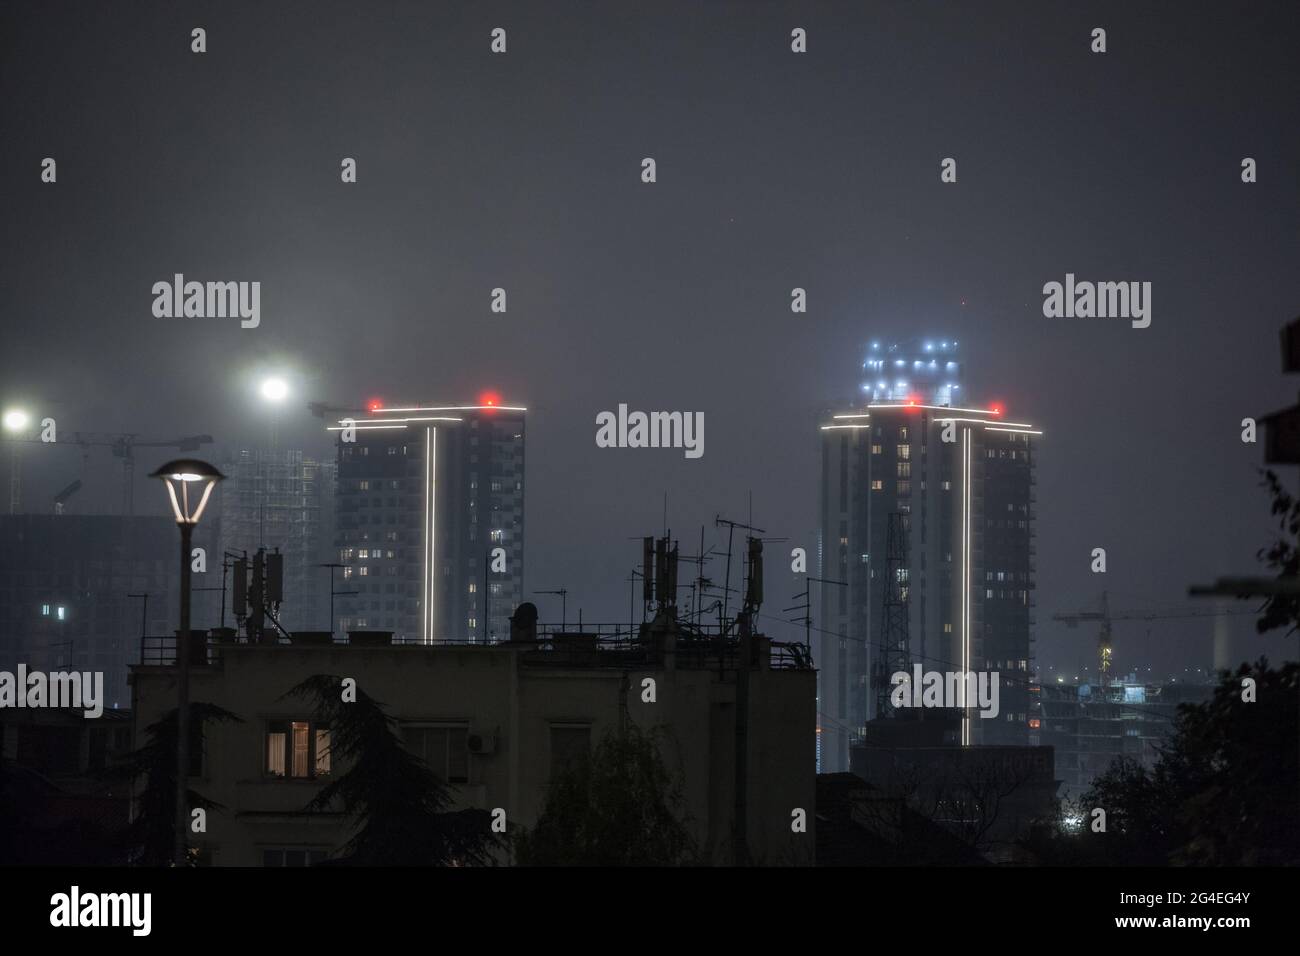 Picture of old and new buildings in belgrade, serbia, during a smoggy foggy night due to pollution. Belgrade, Serbia, is victime of pollution issues i Stock Photo